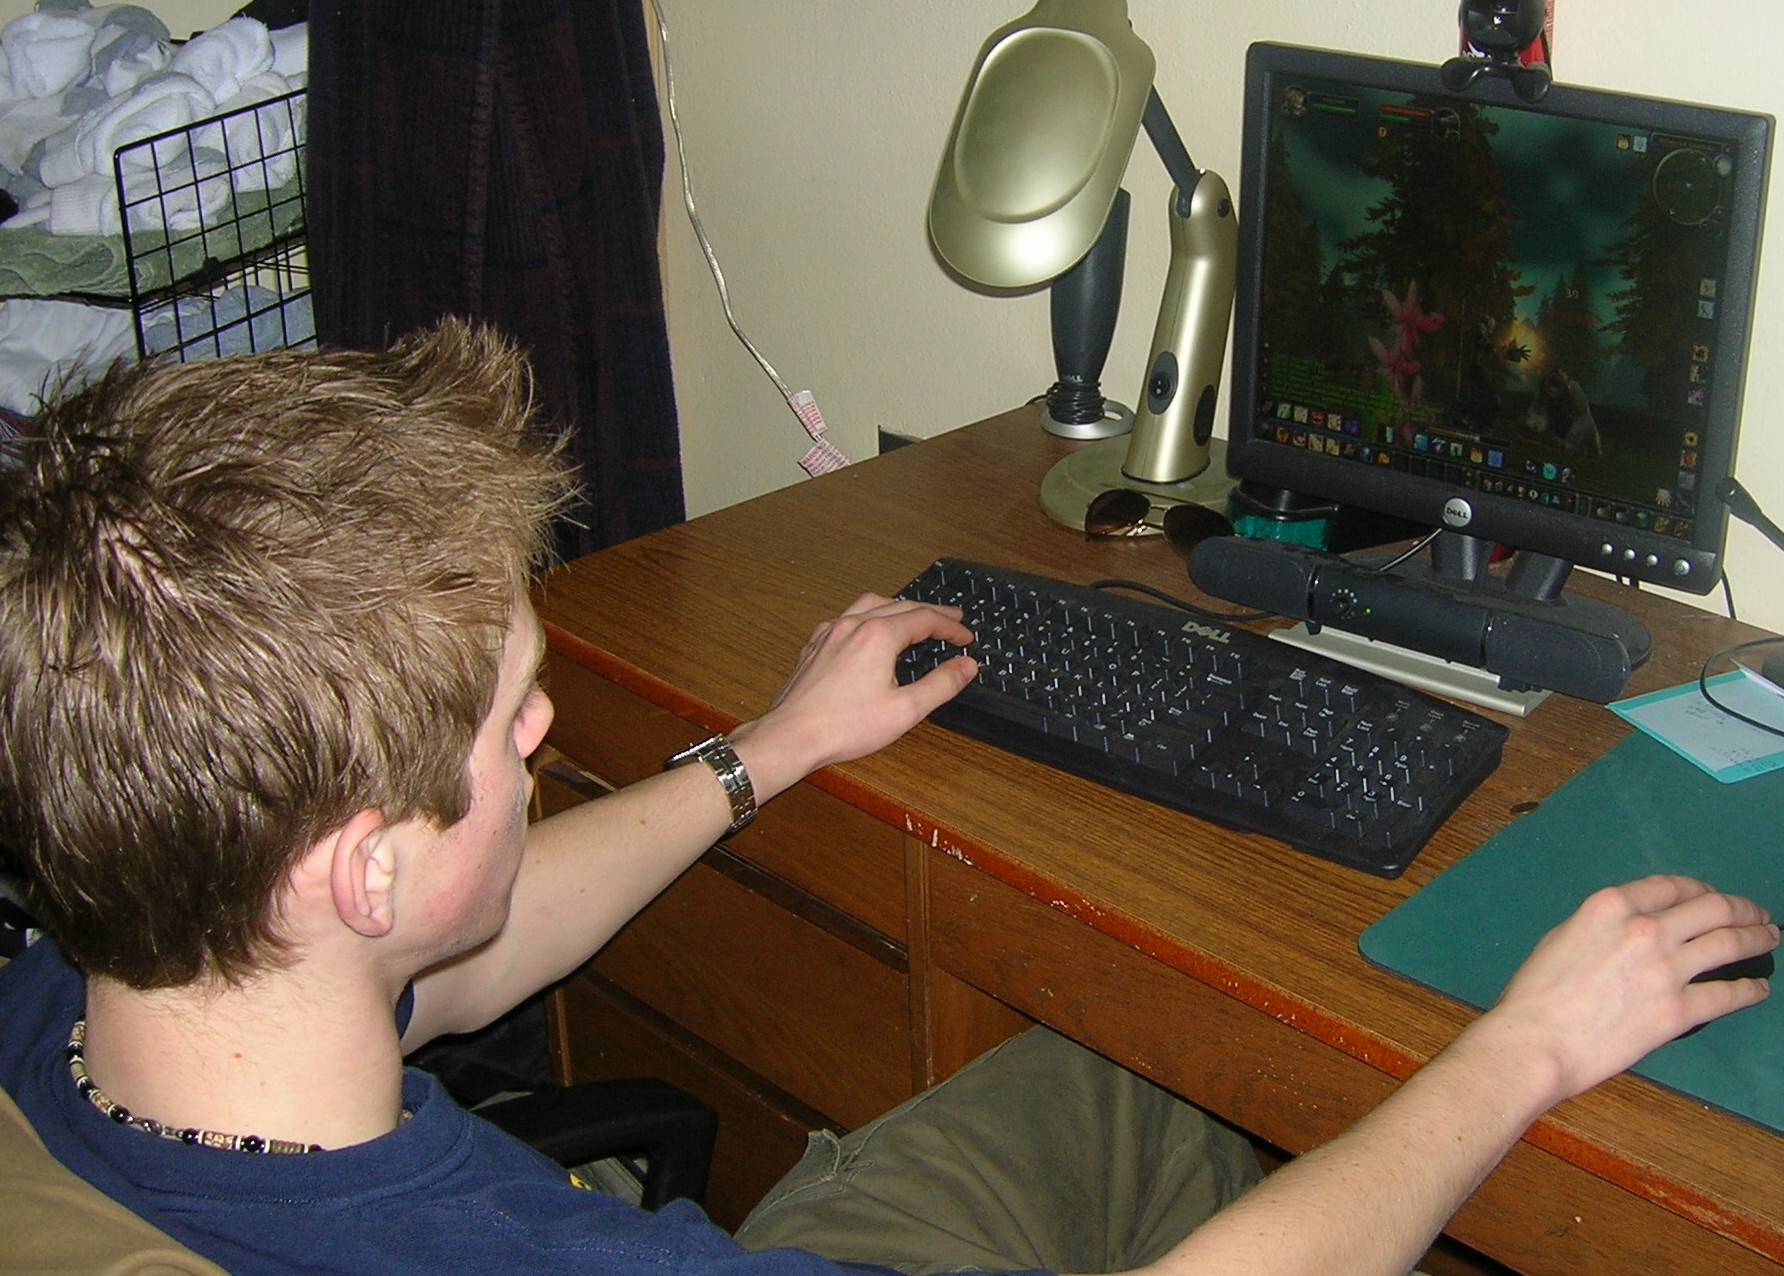 Brian_Smith_playing in his dorm